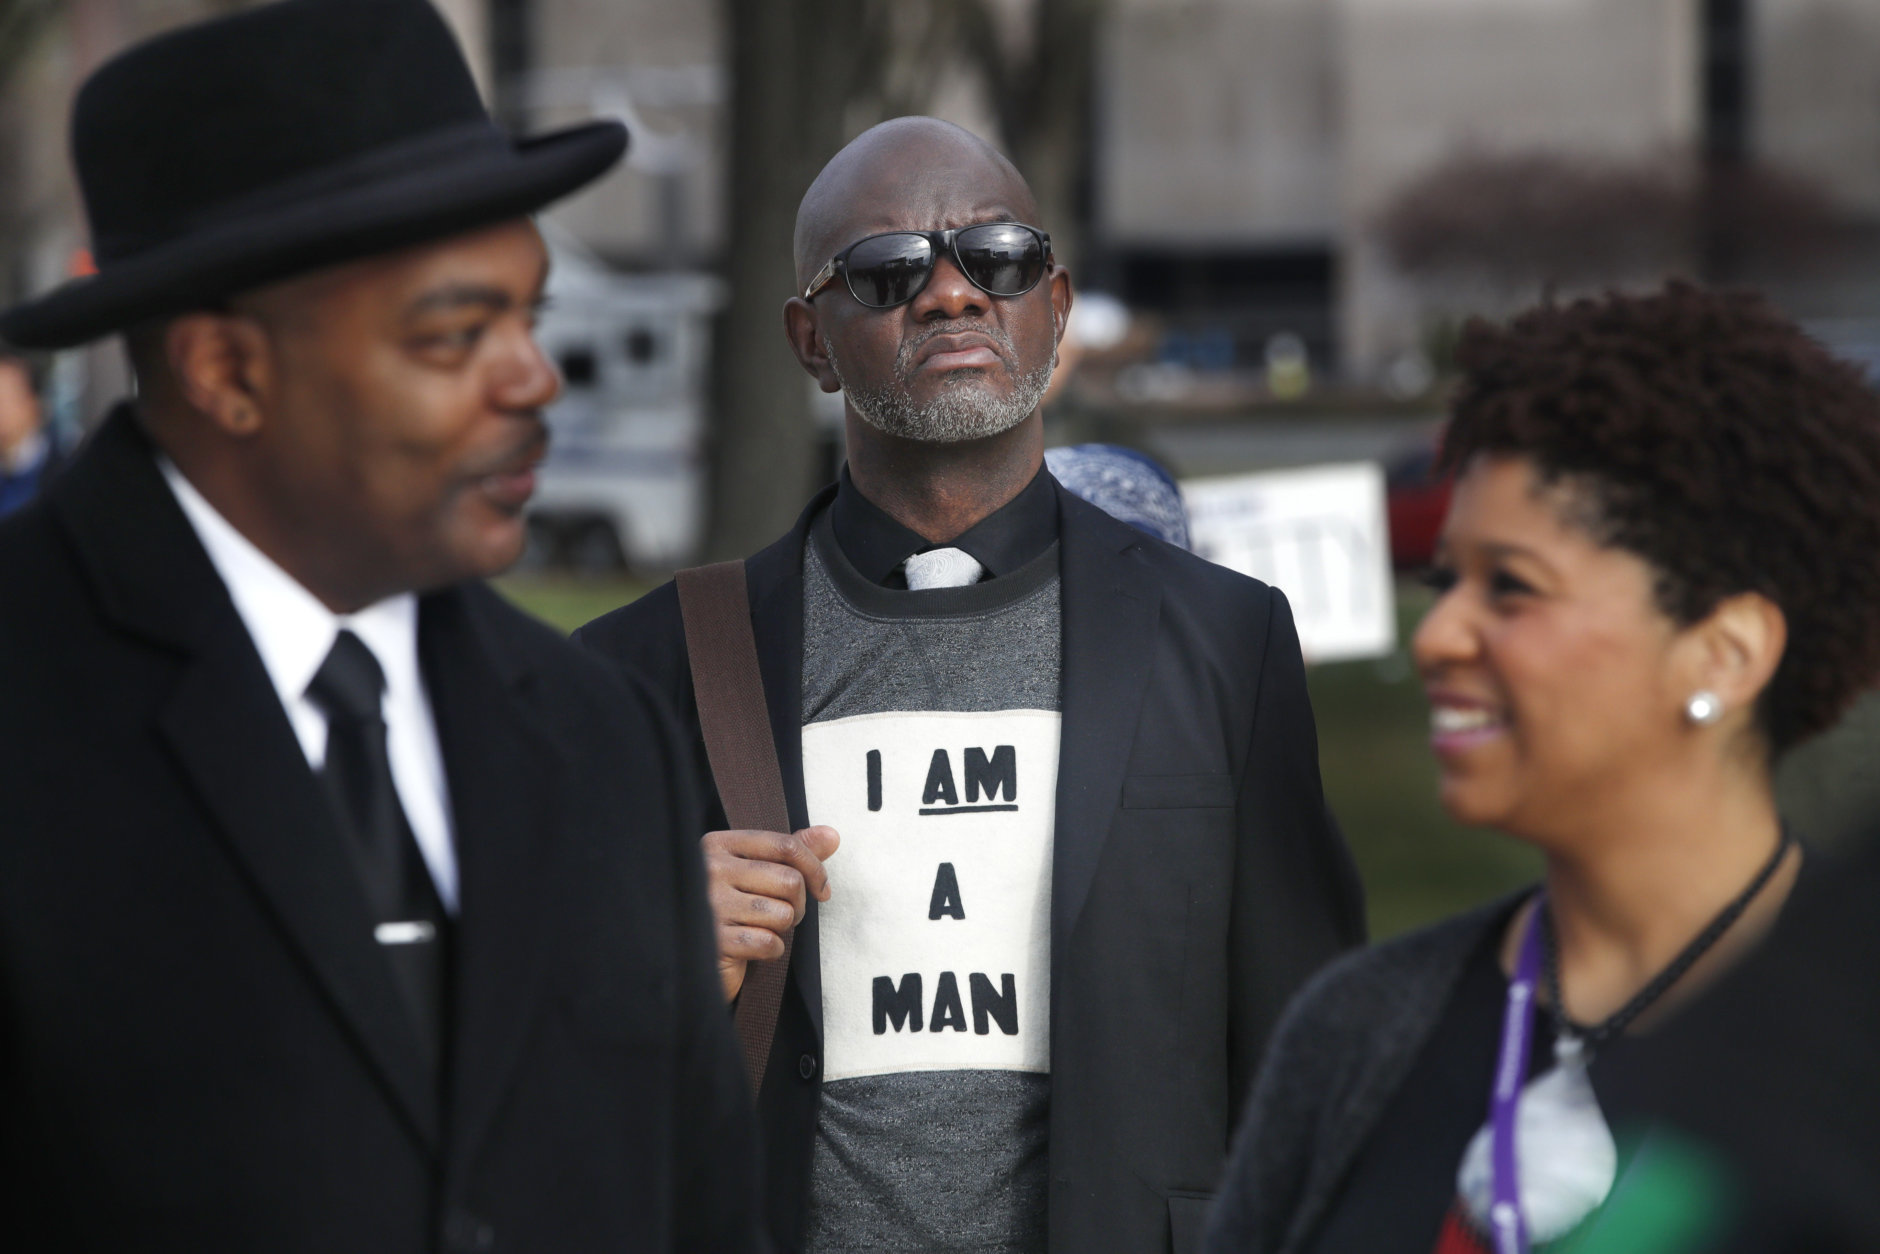 Aaron Ward, of Washington, center, attends the A.C.T. To End Racism rally, Wednesday, April 4, 2018, on the National Mall in Washington, on the 50th anniversary of Martin Luther King Jr.'s assassination. Milton A. Williams, left, pastor of Pennsylvania Ave. AME Zion Church in Baltimore and Ruth LaToison Ifill, with AME Zion Church, right. (AP Photo/Jacquelyn Martin)